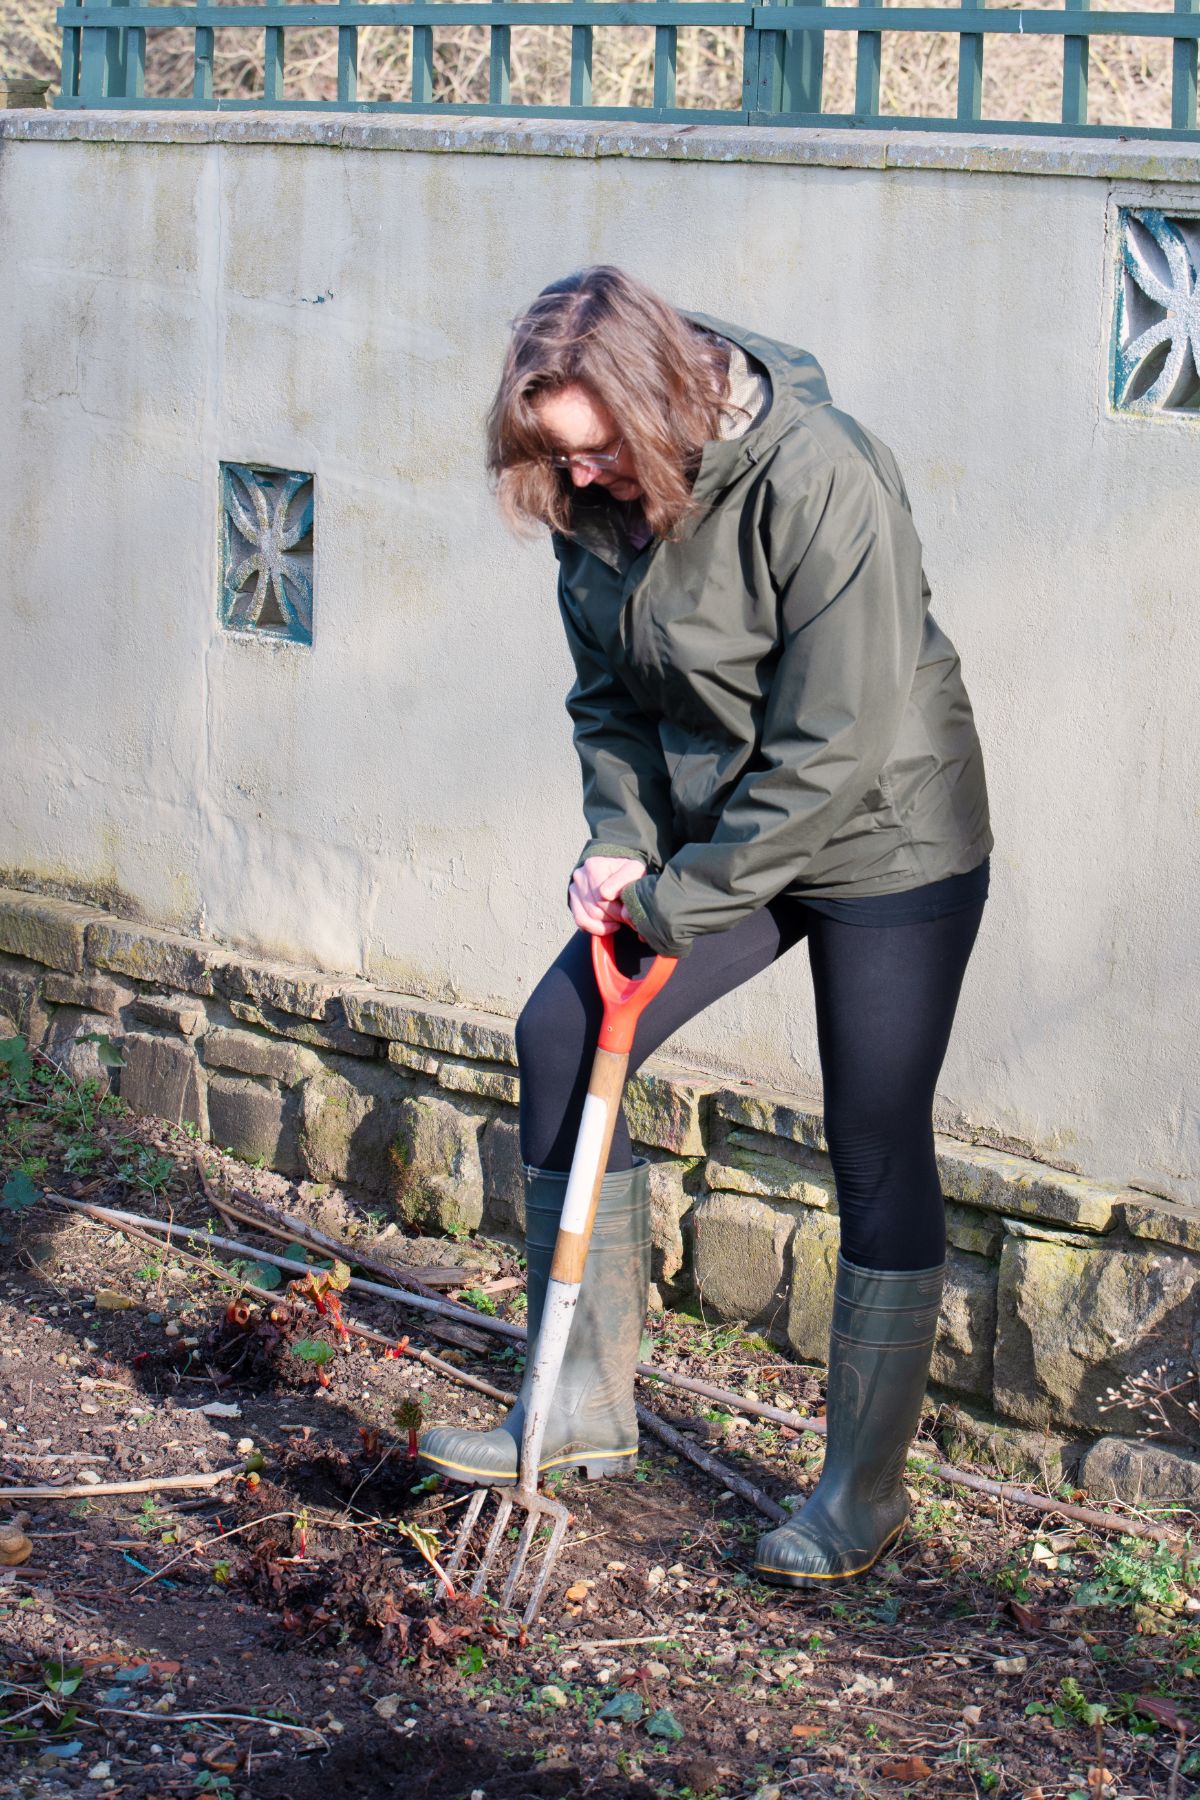 A woman digging old rhubarb plants to divide them and promote new growth